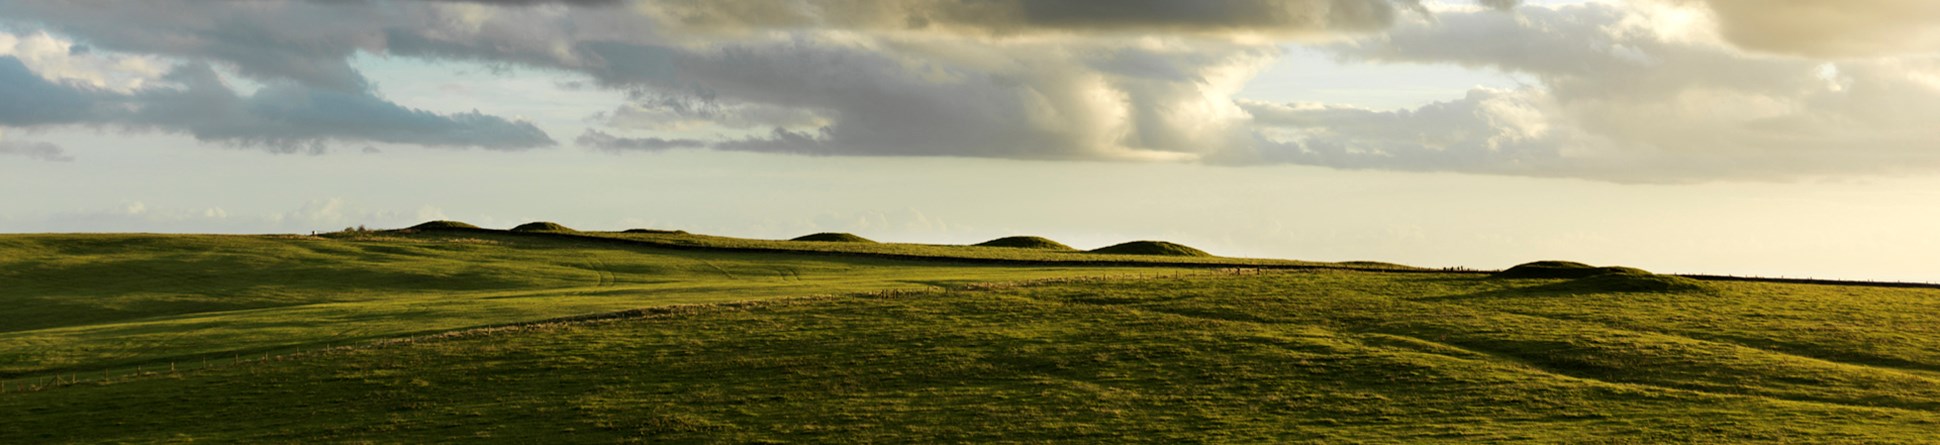 line of barrows at Priddy silhouetted against the sky